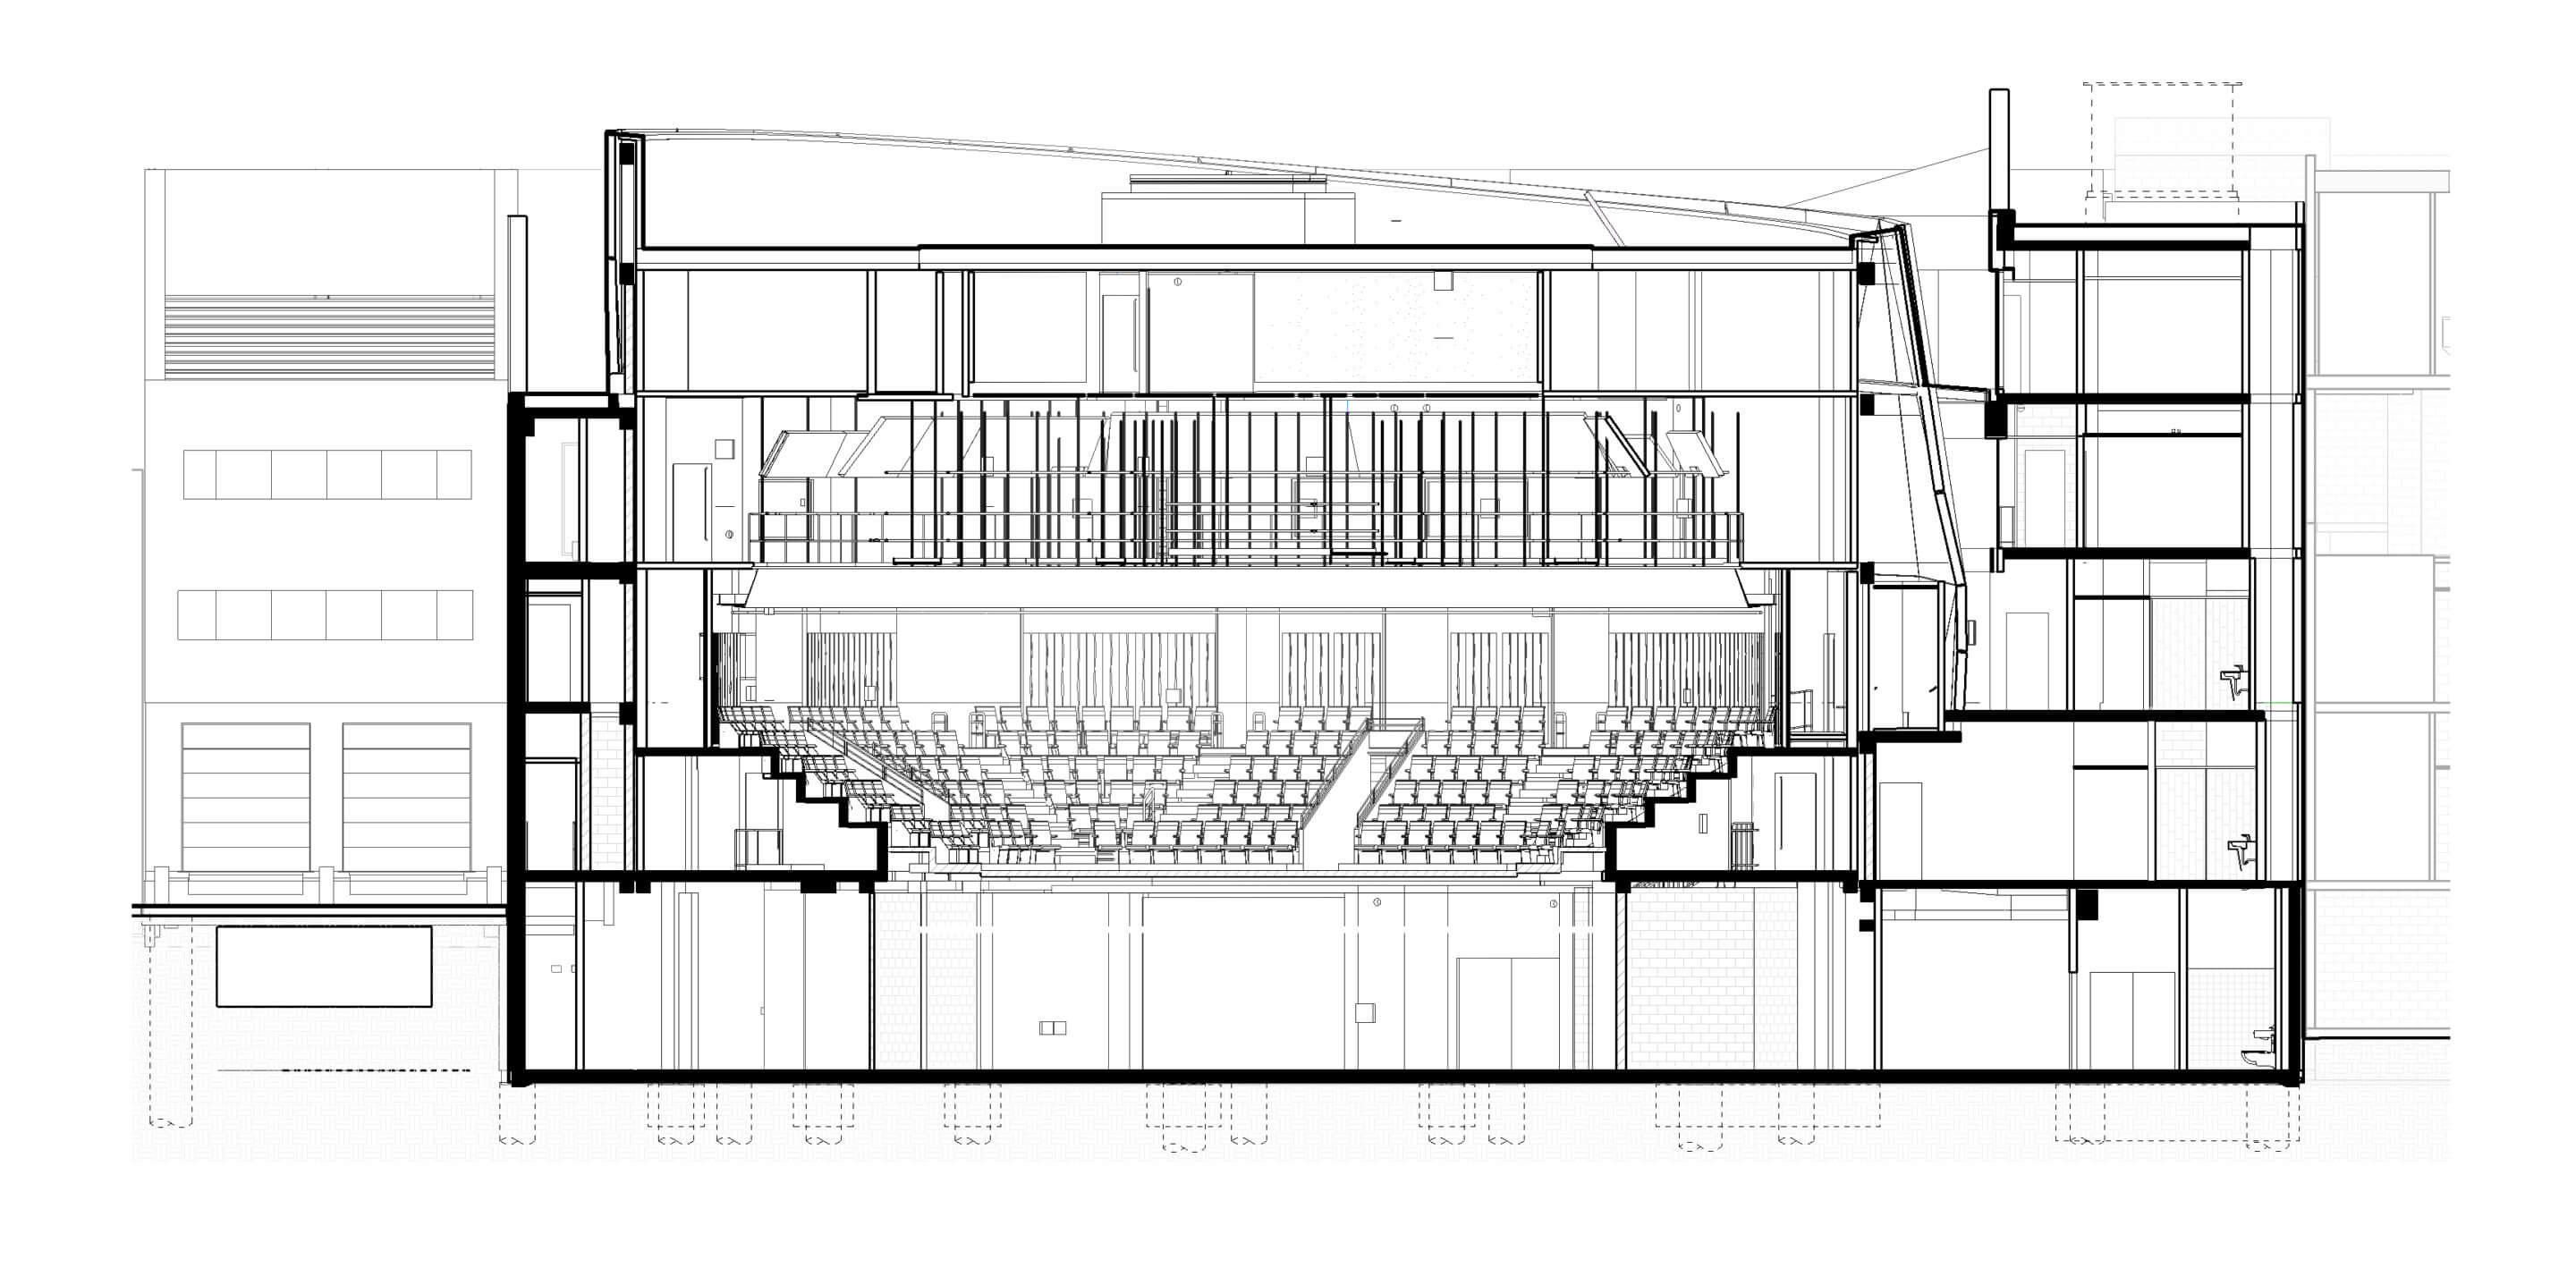 a cross section of the auditorium at the steppenwolf theater